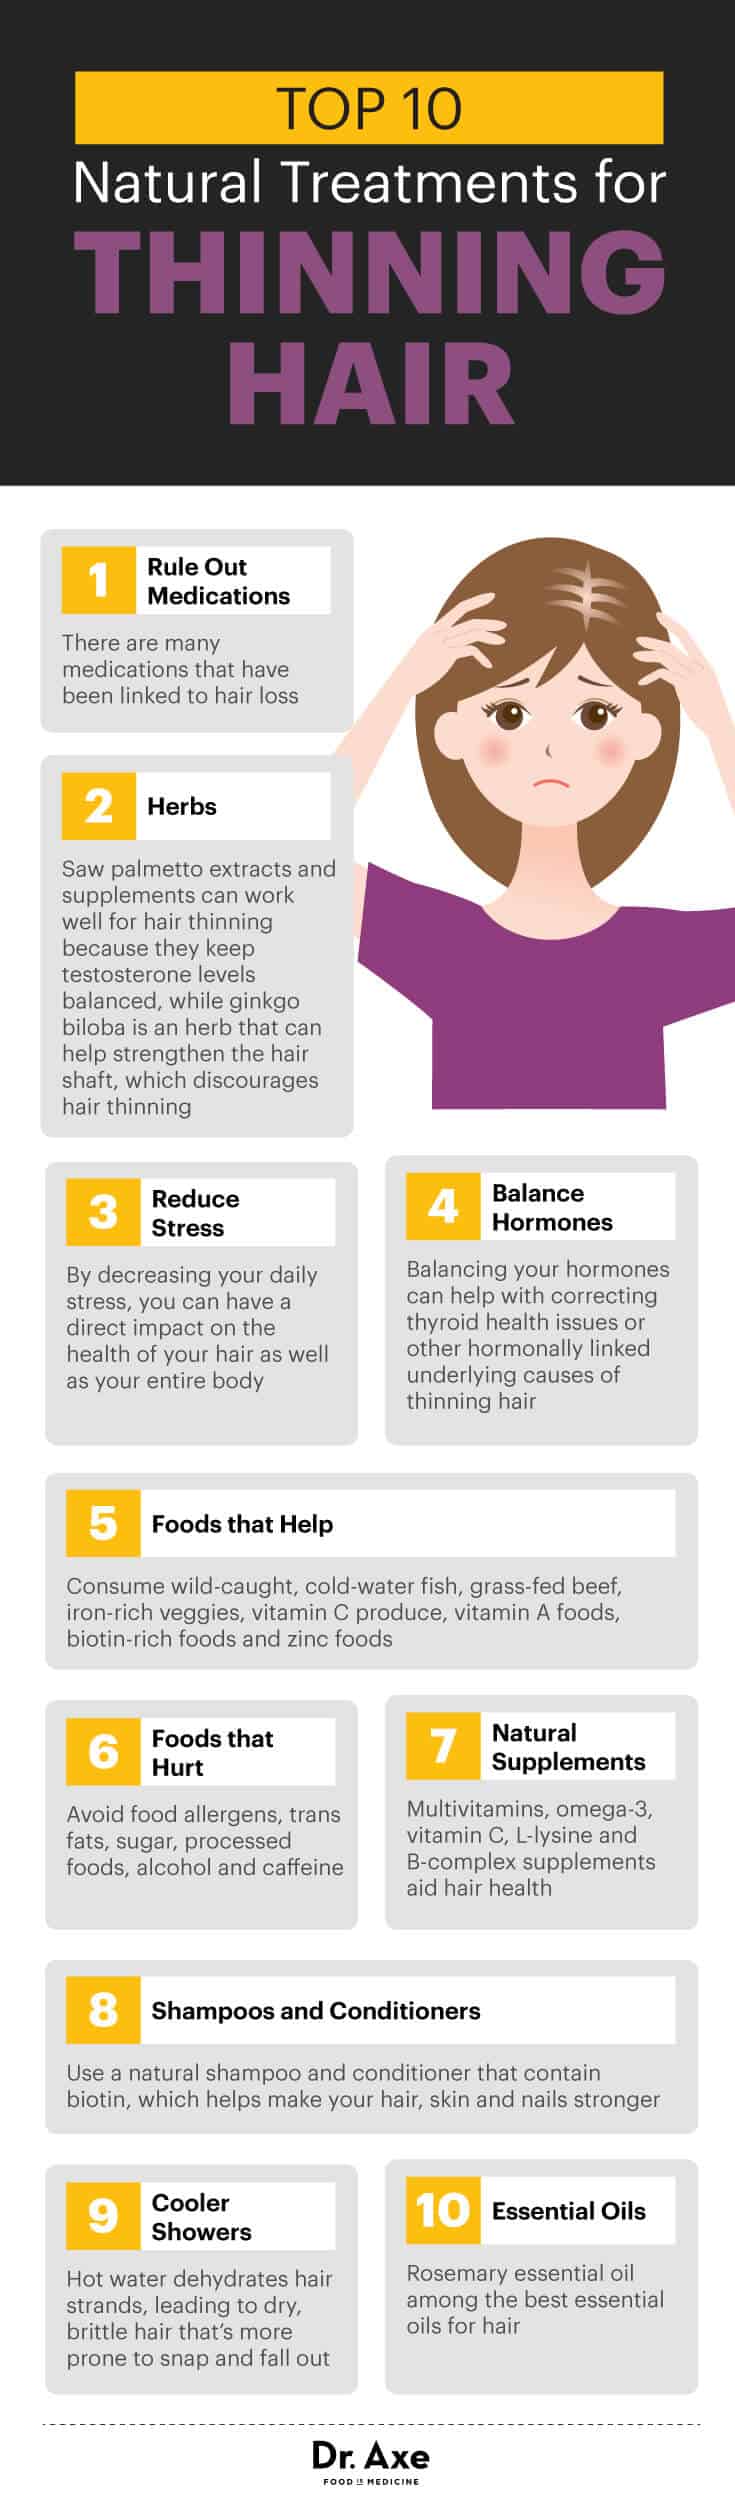 10 natural treatments for thinning hair - Dr. Axe